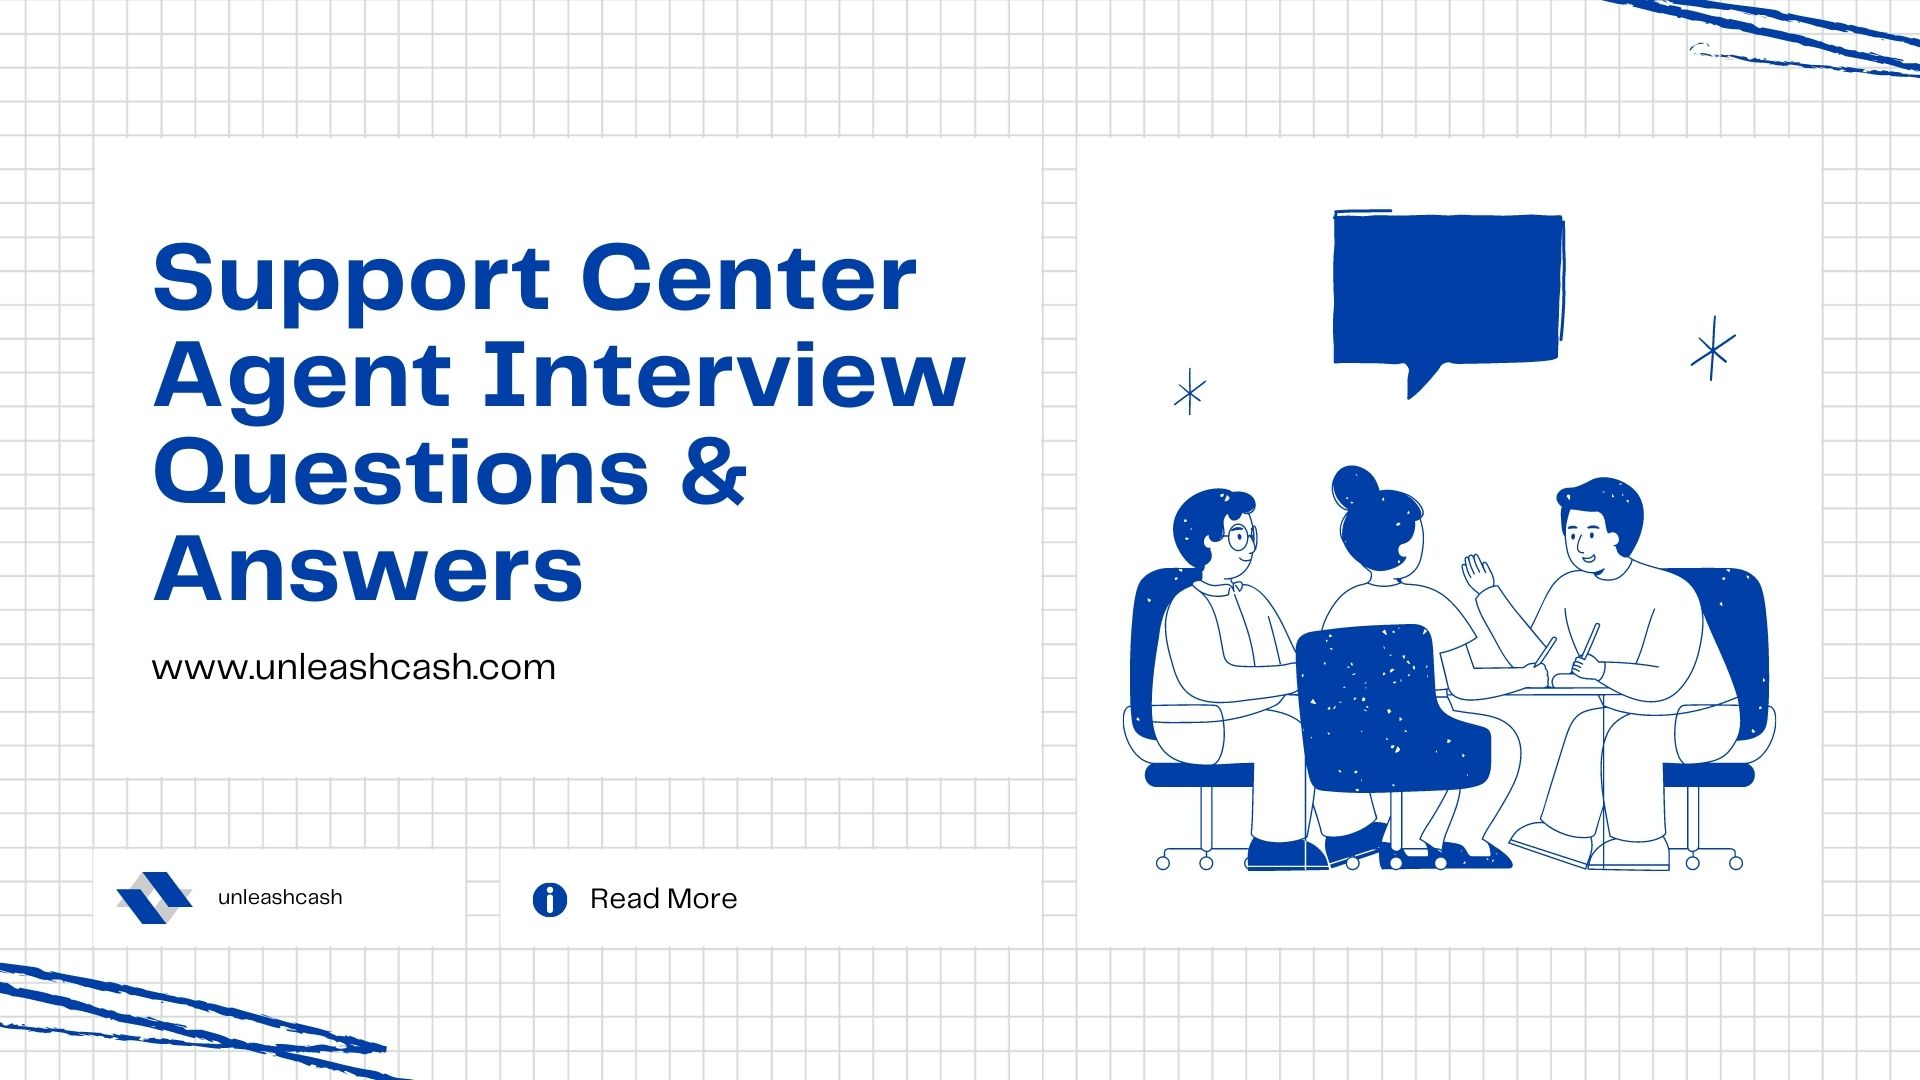 Support Center Agent Interview Questions & Answers